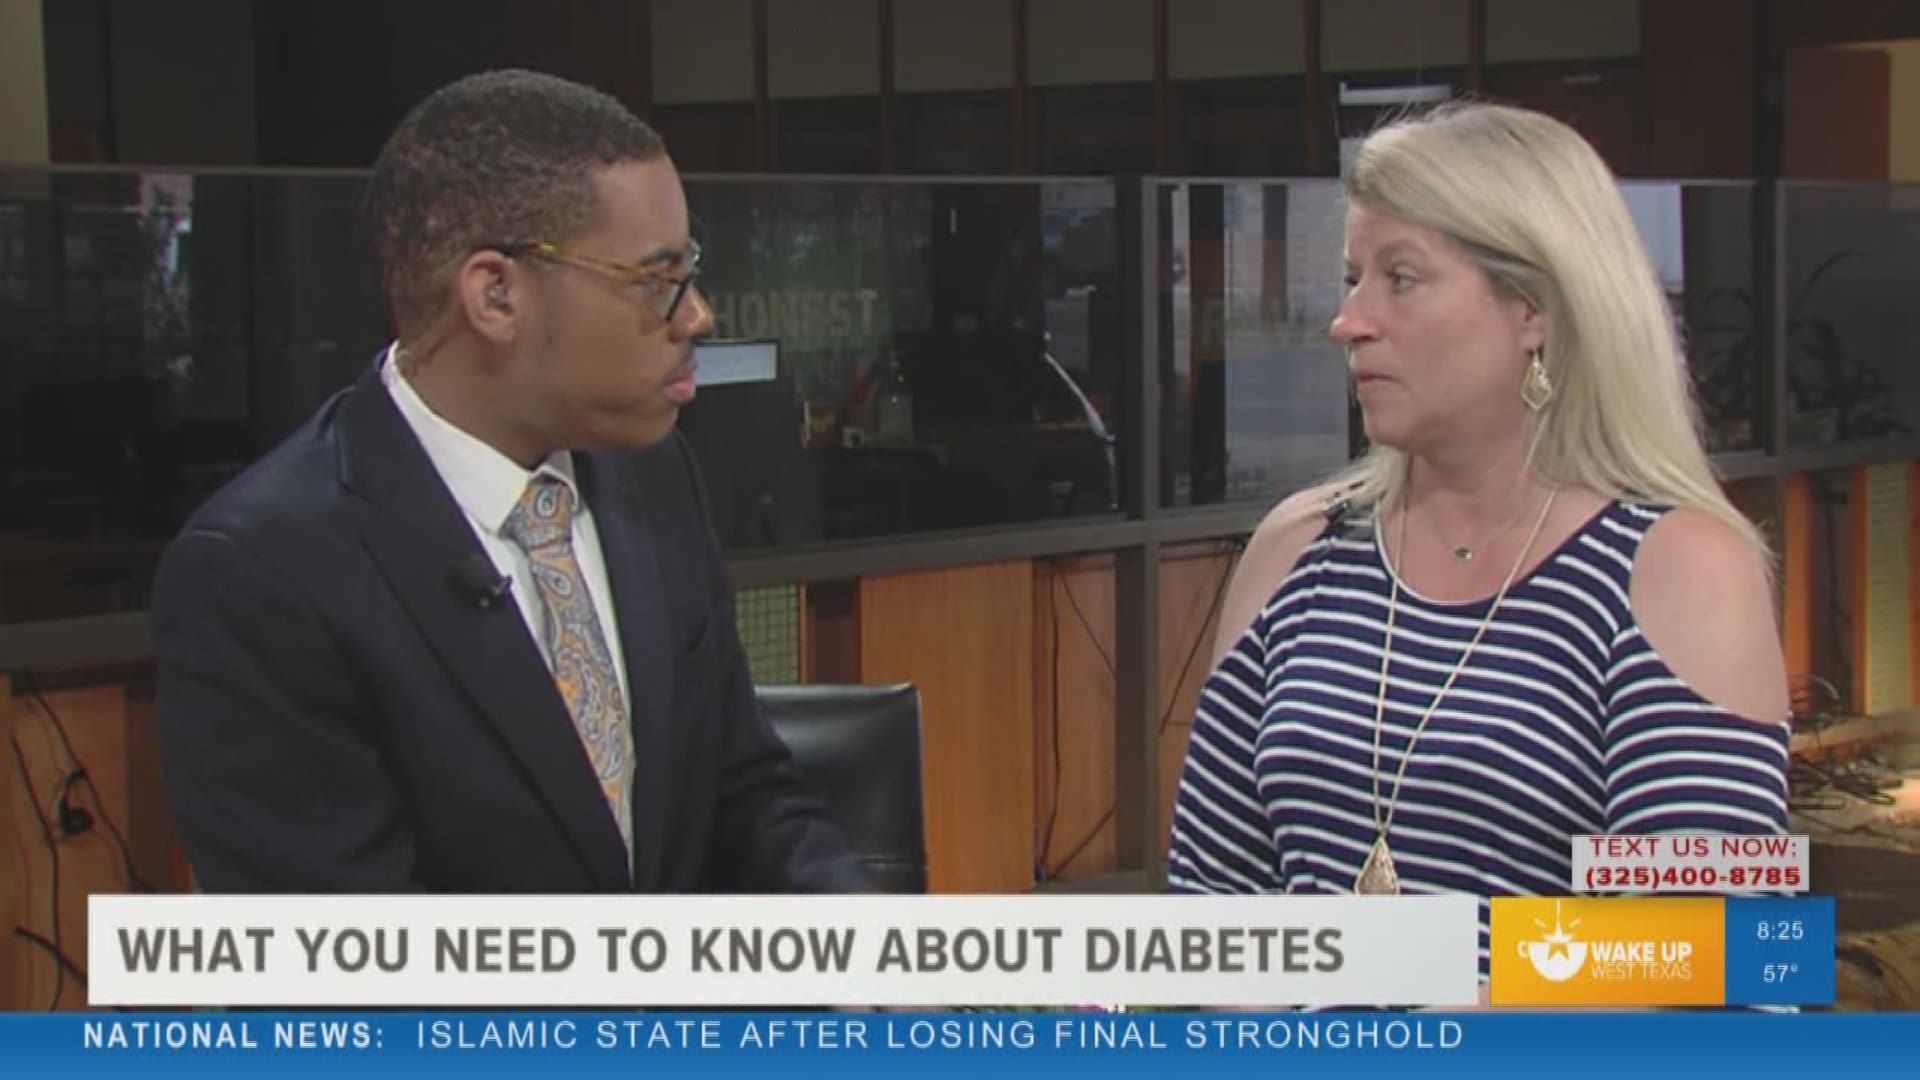 Our Malik Mingo spoke with the Diabetes program coordinator at Shannon Medical Center about Diabetes Alert Day, which is Tuesday, March 25, 2019.